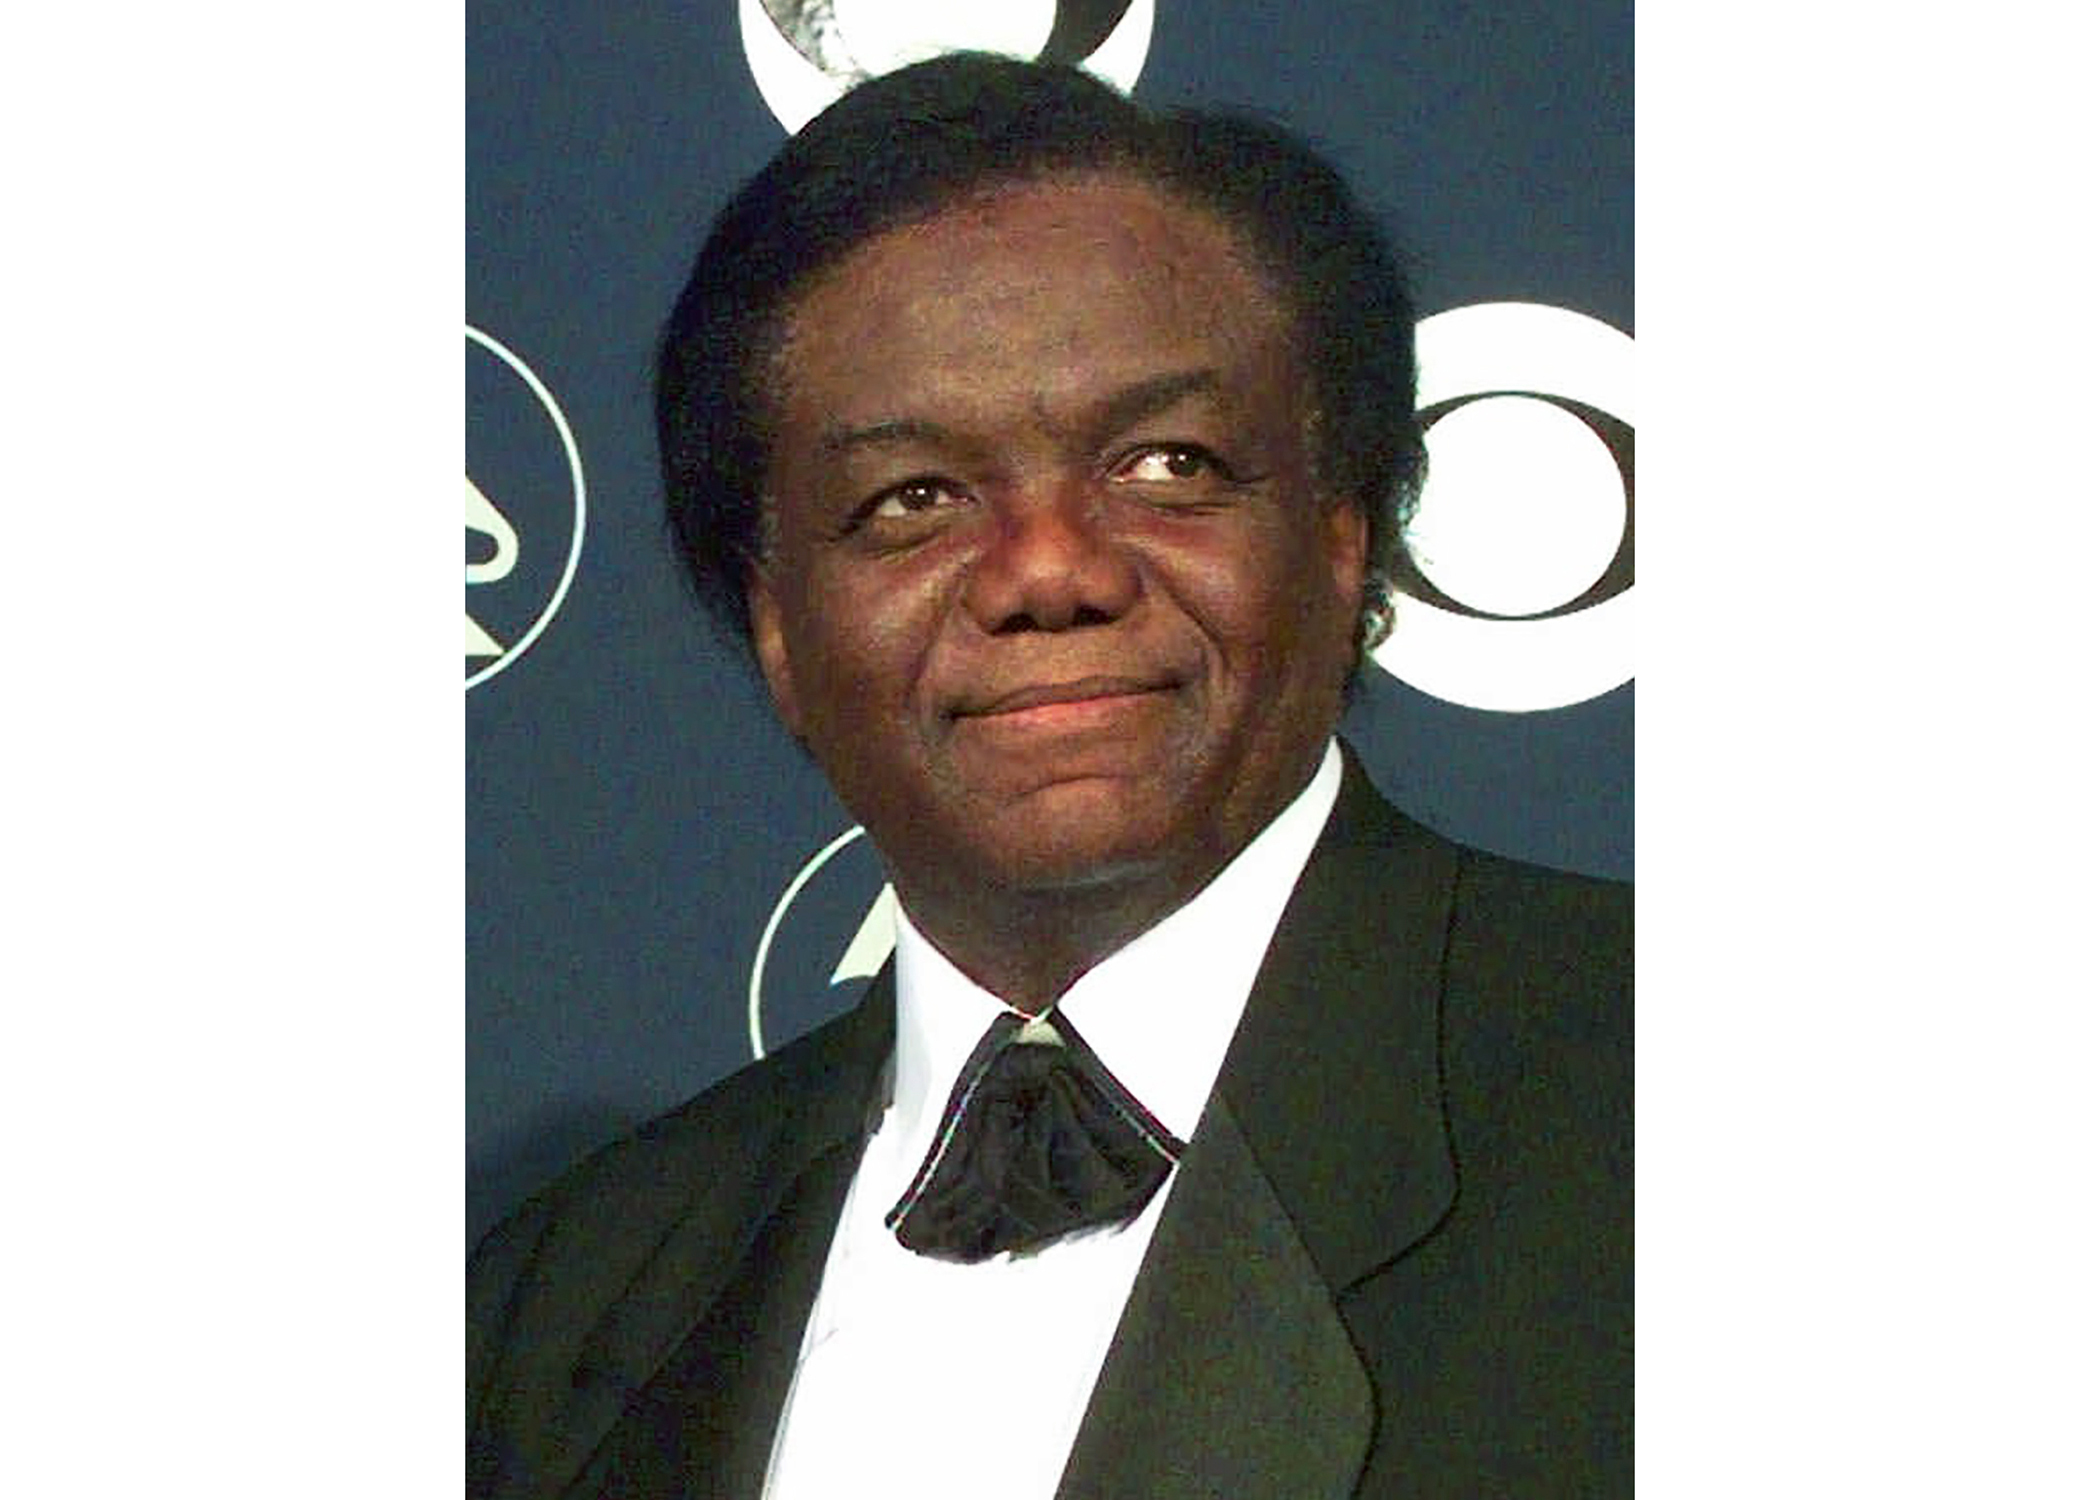 FILE - Songwriter/producer Lamont Dozier appears at the 40th Annual Grammy Awards in New York on Feb. 25, 1998. Dozier, of the celebrated Holland-Dozier-Holland team that wrote and produced “You Can’t Hurry Love,” “Heat Wave” and dozens of other hits and helped make Motown an essential record company of the 1960s and beyond, has died at age 81. (AP Photo/Richard Drew, File)